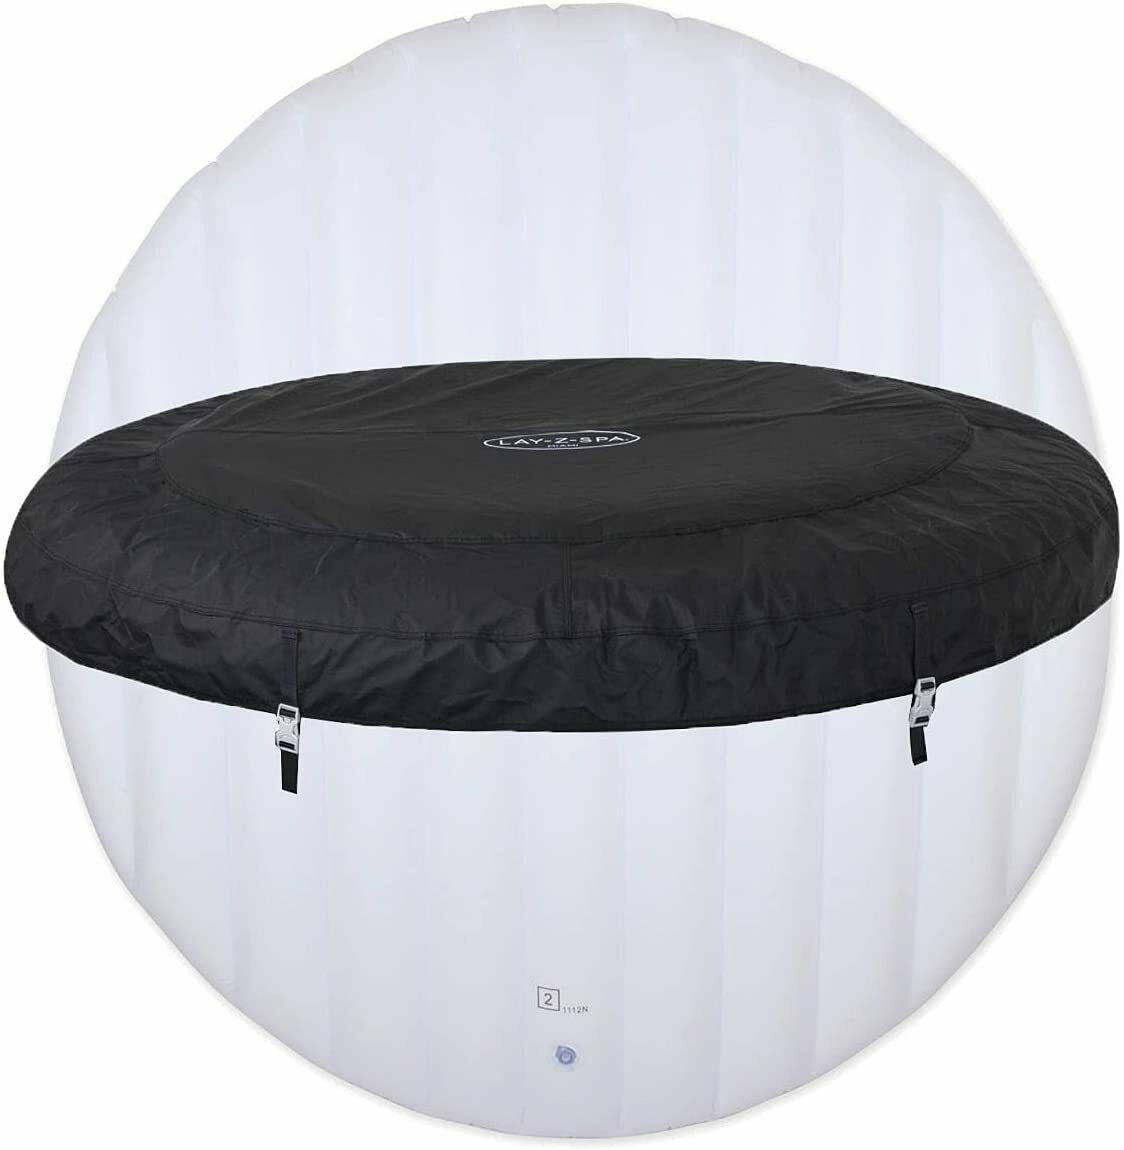 Lay-Z-Spa Miami Replacement Lid Complete – Pulse Leisure